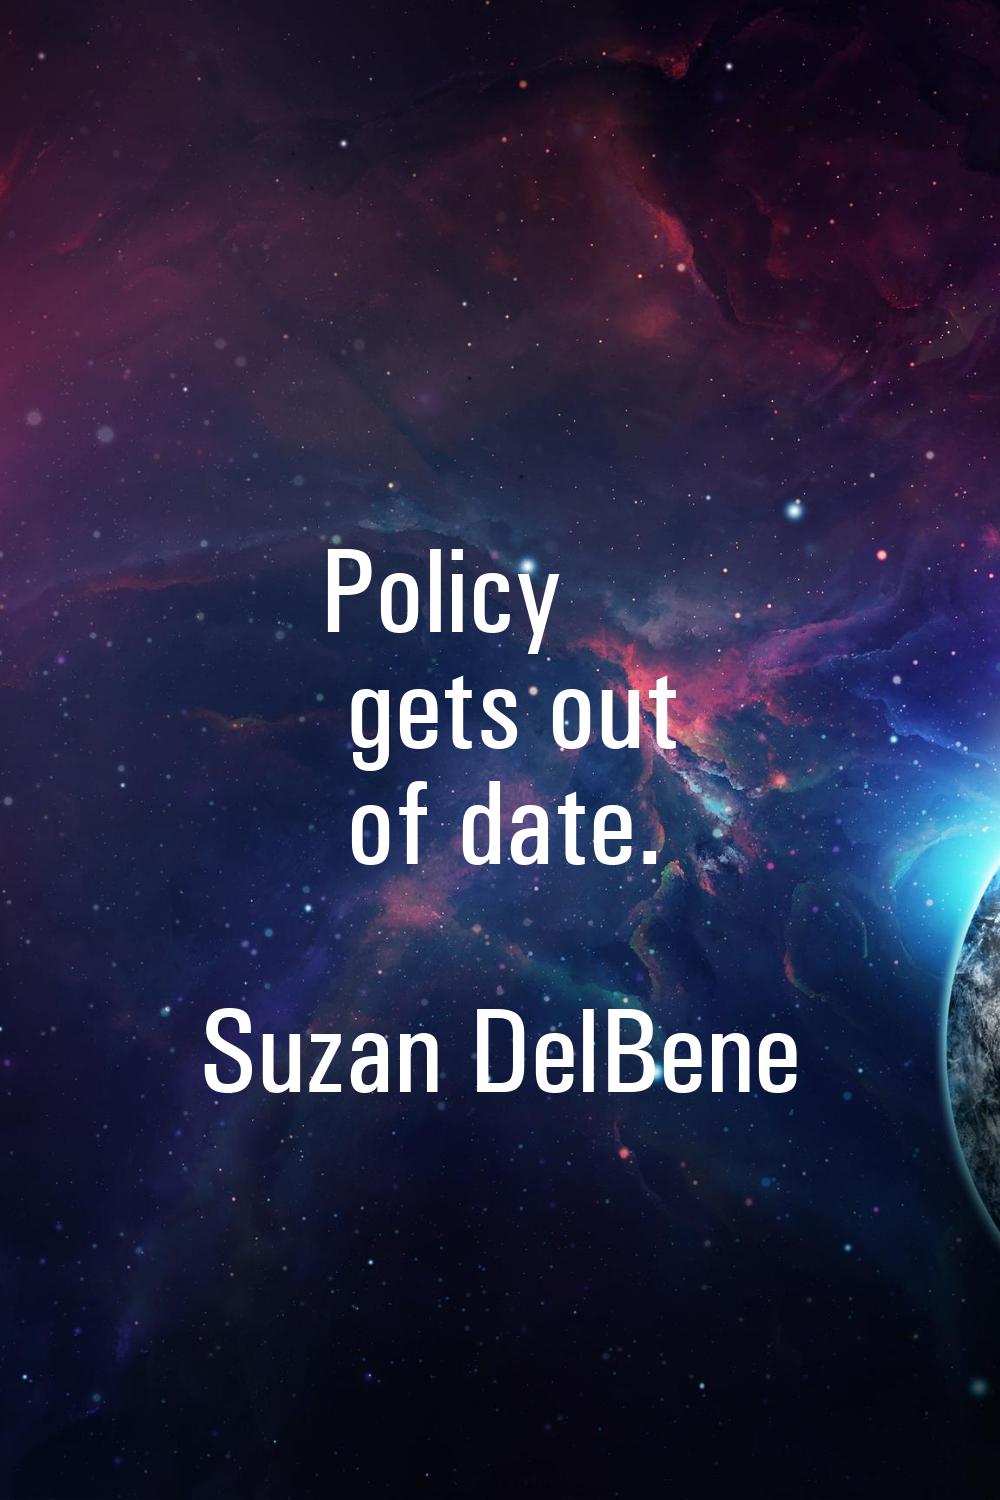 Policy gets out of date.